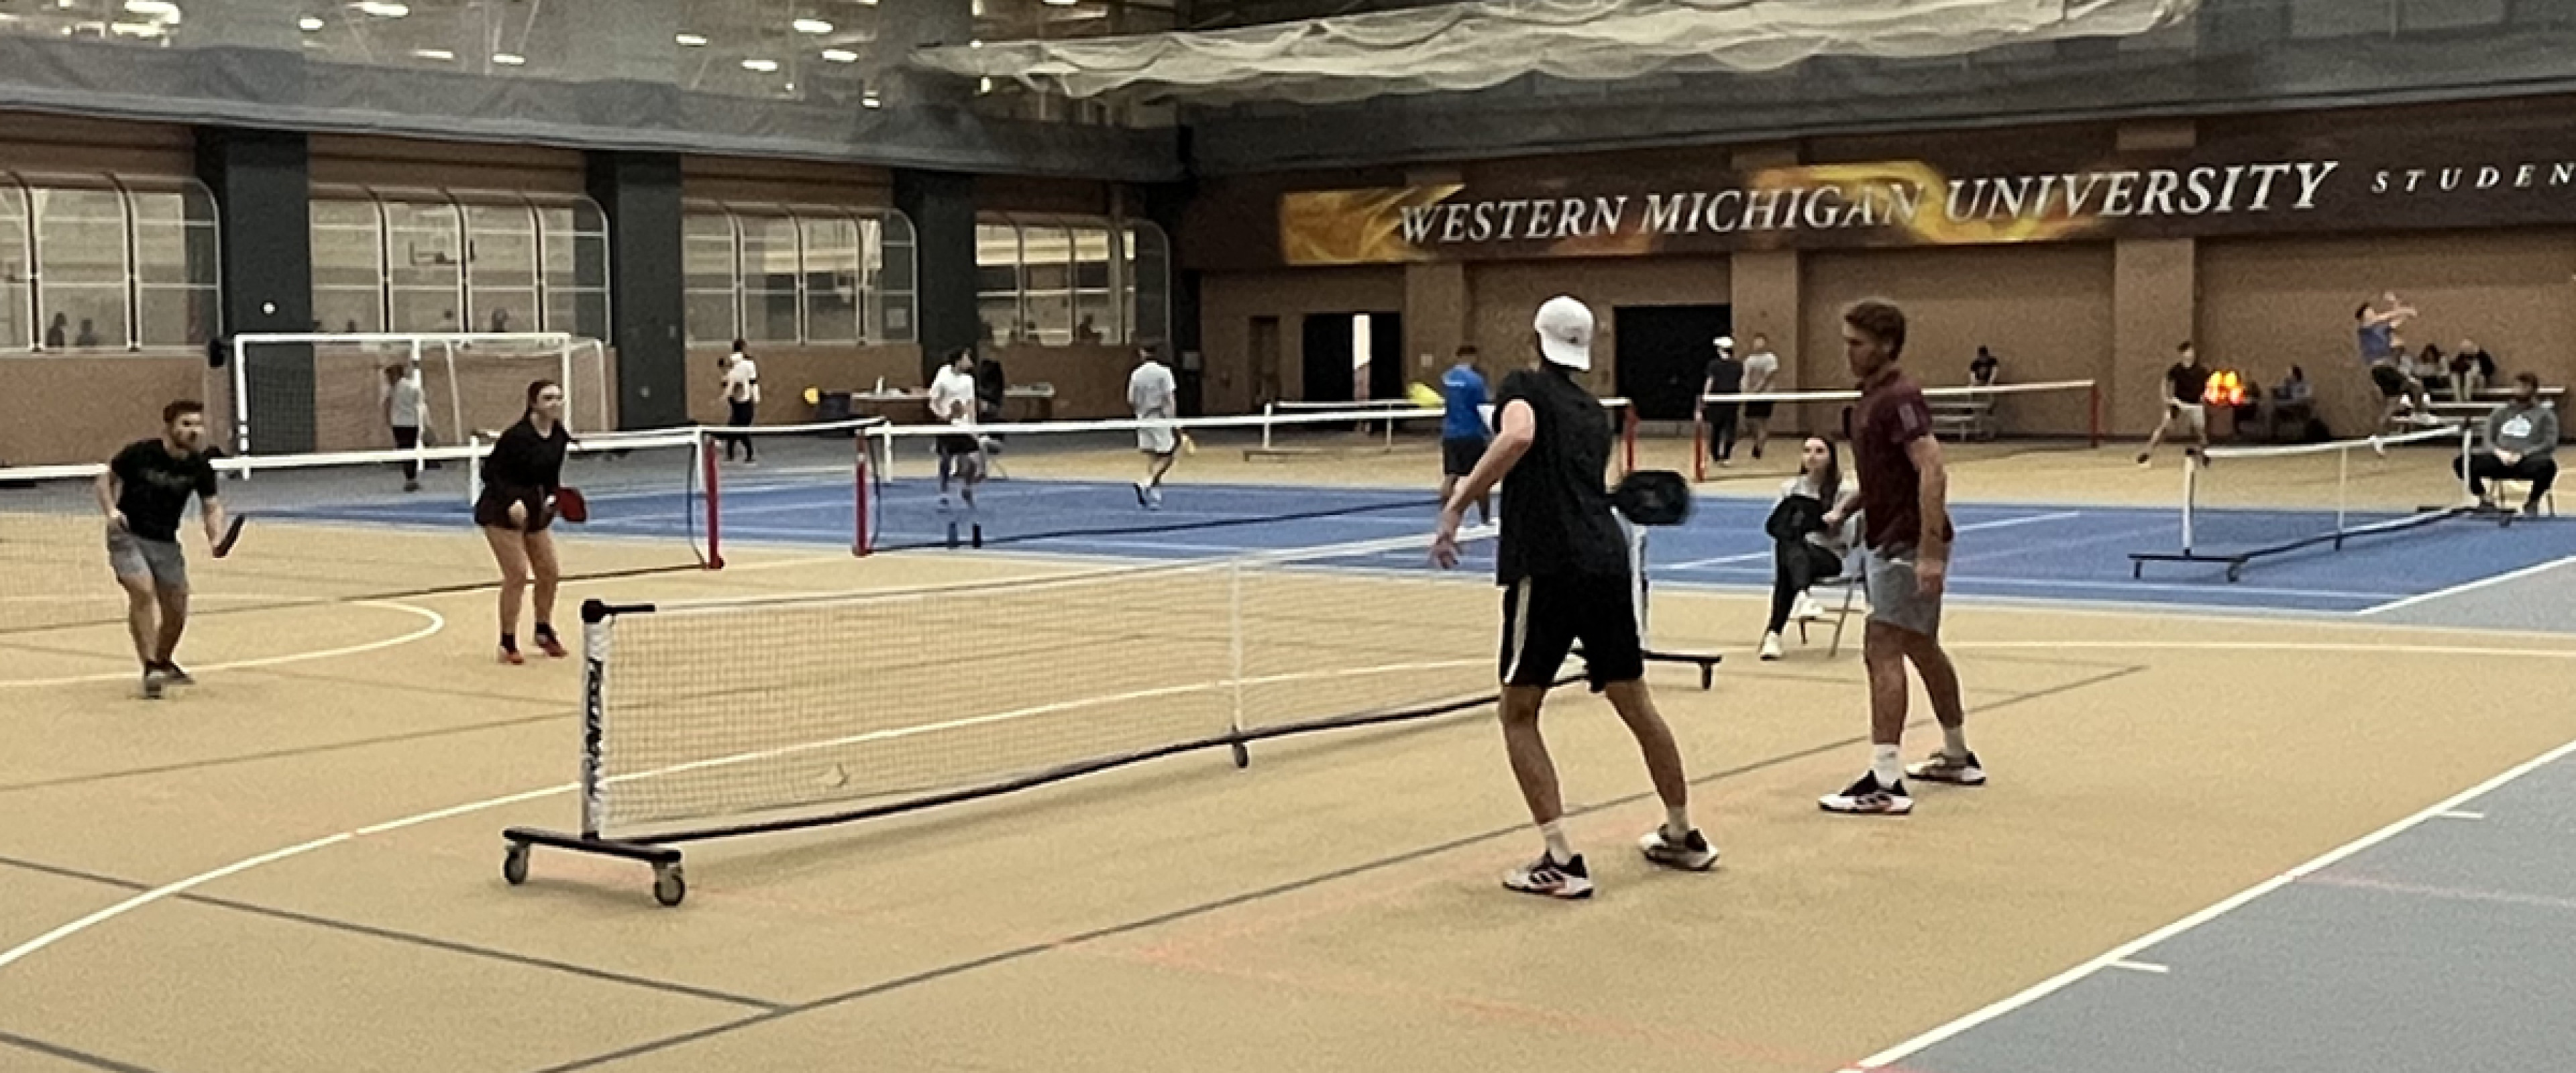 Group of people playing pickleball with a net